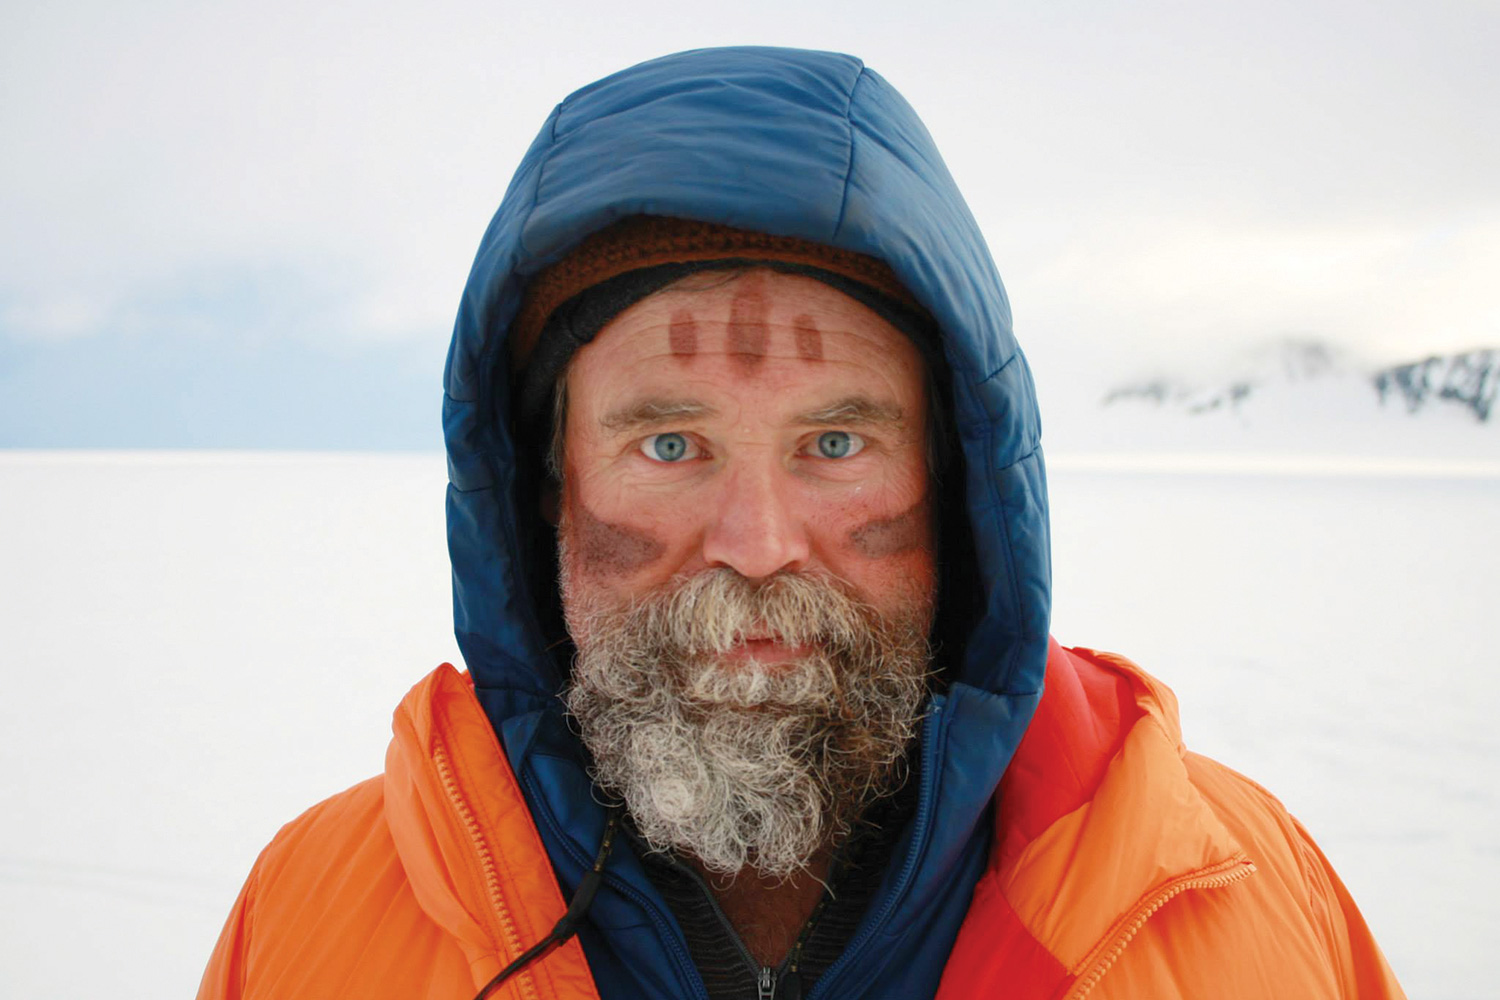 Craig Childs pictured in a winter landscape. He has three mud lines painted on his forehead and one on each cheek.